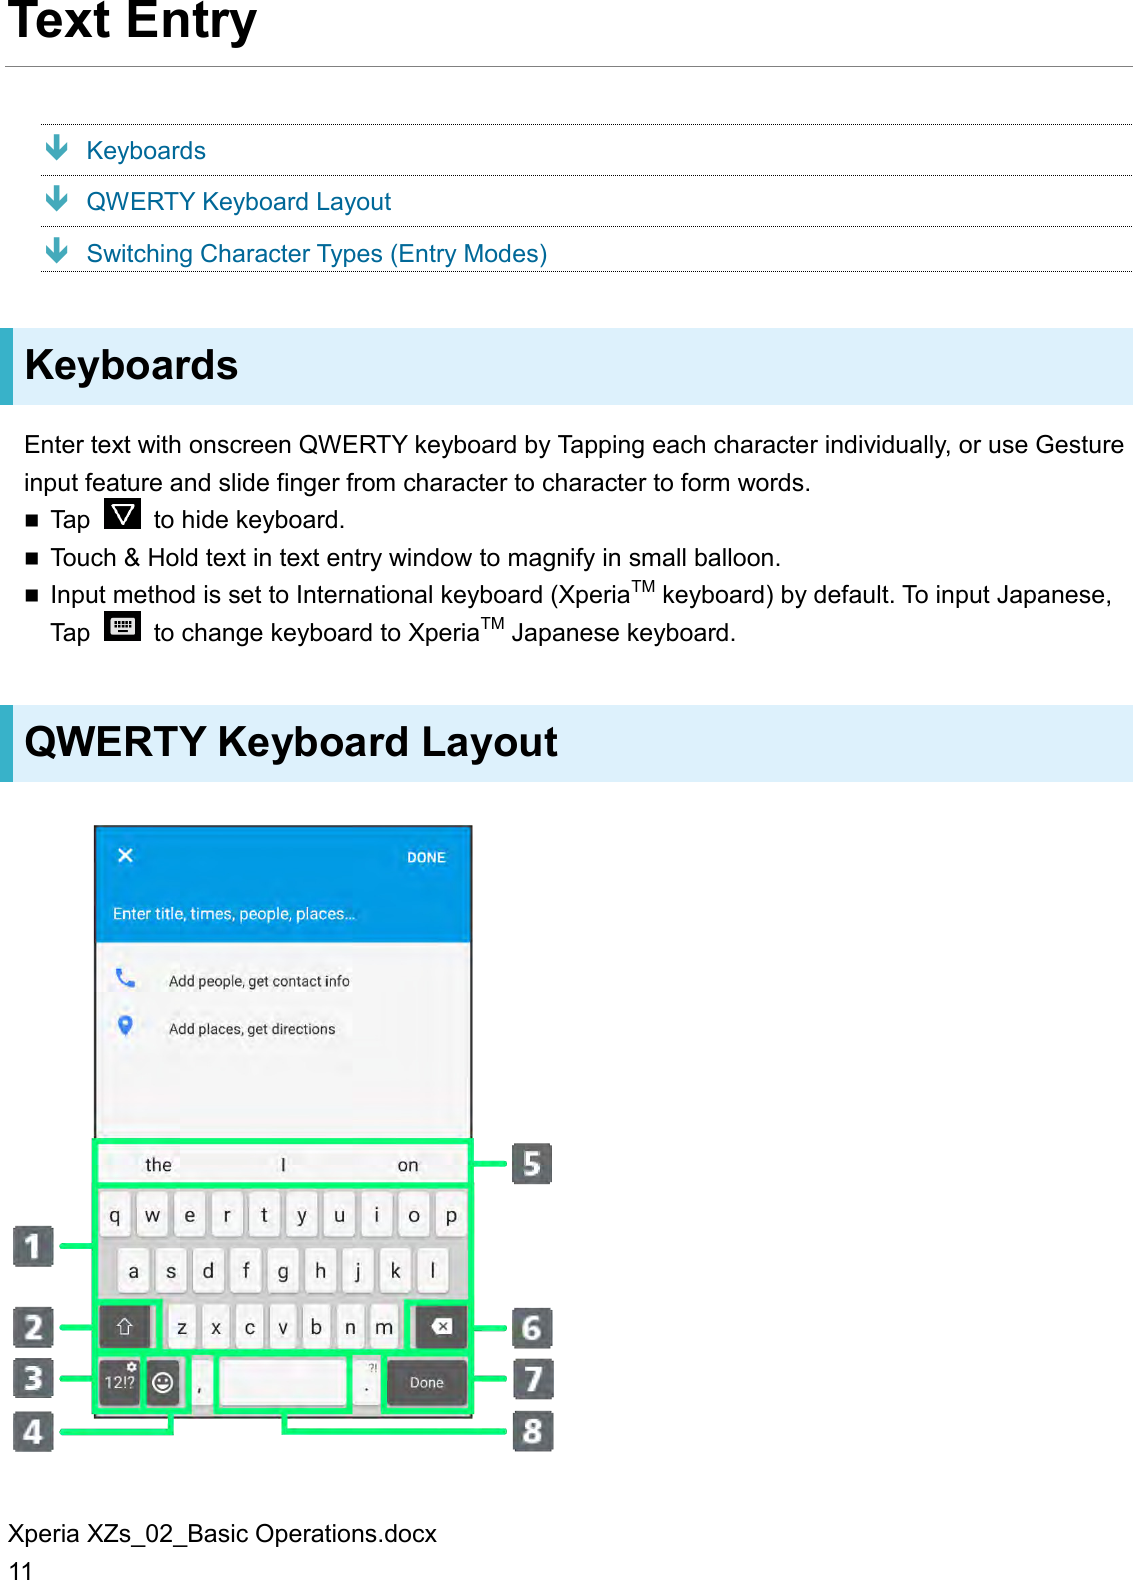 Xperia XZs_02_Basic Operations.docx 11 Text Entry  Keyboards  QWERTY Keyboard Layout  Switching Character Types (Entry Modes) Keyboards Enter text with onscreen QWERTY keyboard by Tapping each character individually, or use Gesture input feature and slide finger from character to character to form words.  Tap    to hide keyboard.  Touch &amp; Hold text in text entry window to magnify in small balloon.  Input method is set to International keyboard (XperiaTM keyboard) by default. To input Japanese, Tap    to change keyboard to XperiaTM Japanese keyboard. QWERTY Keyboard Layout  